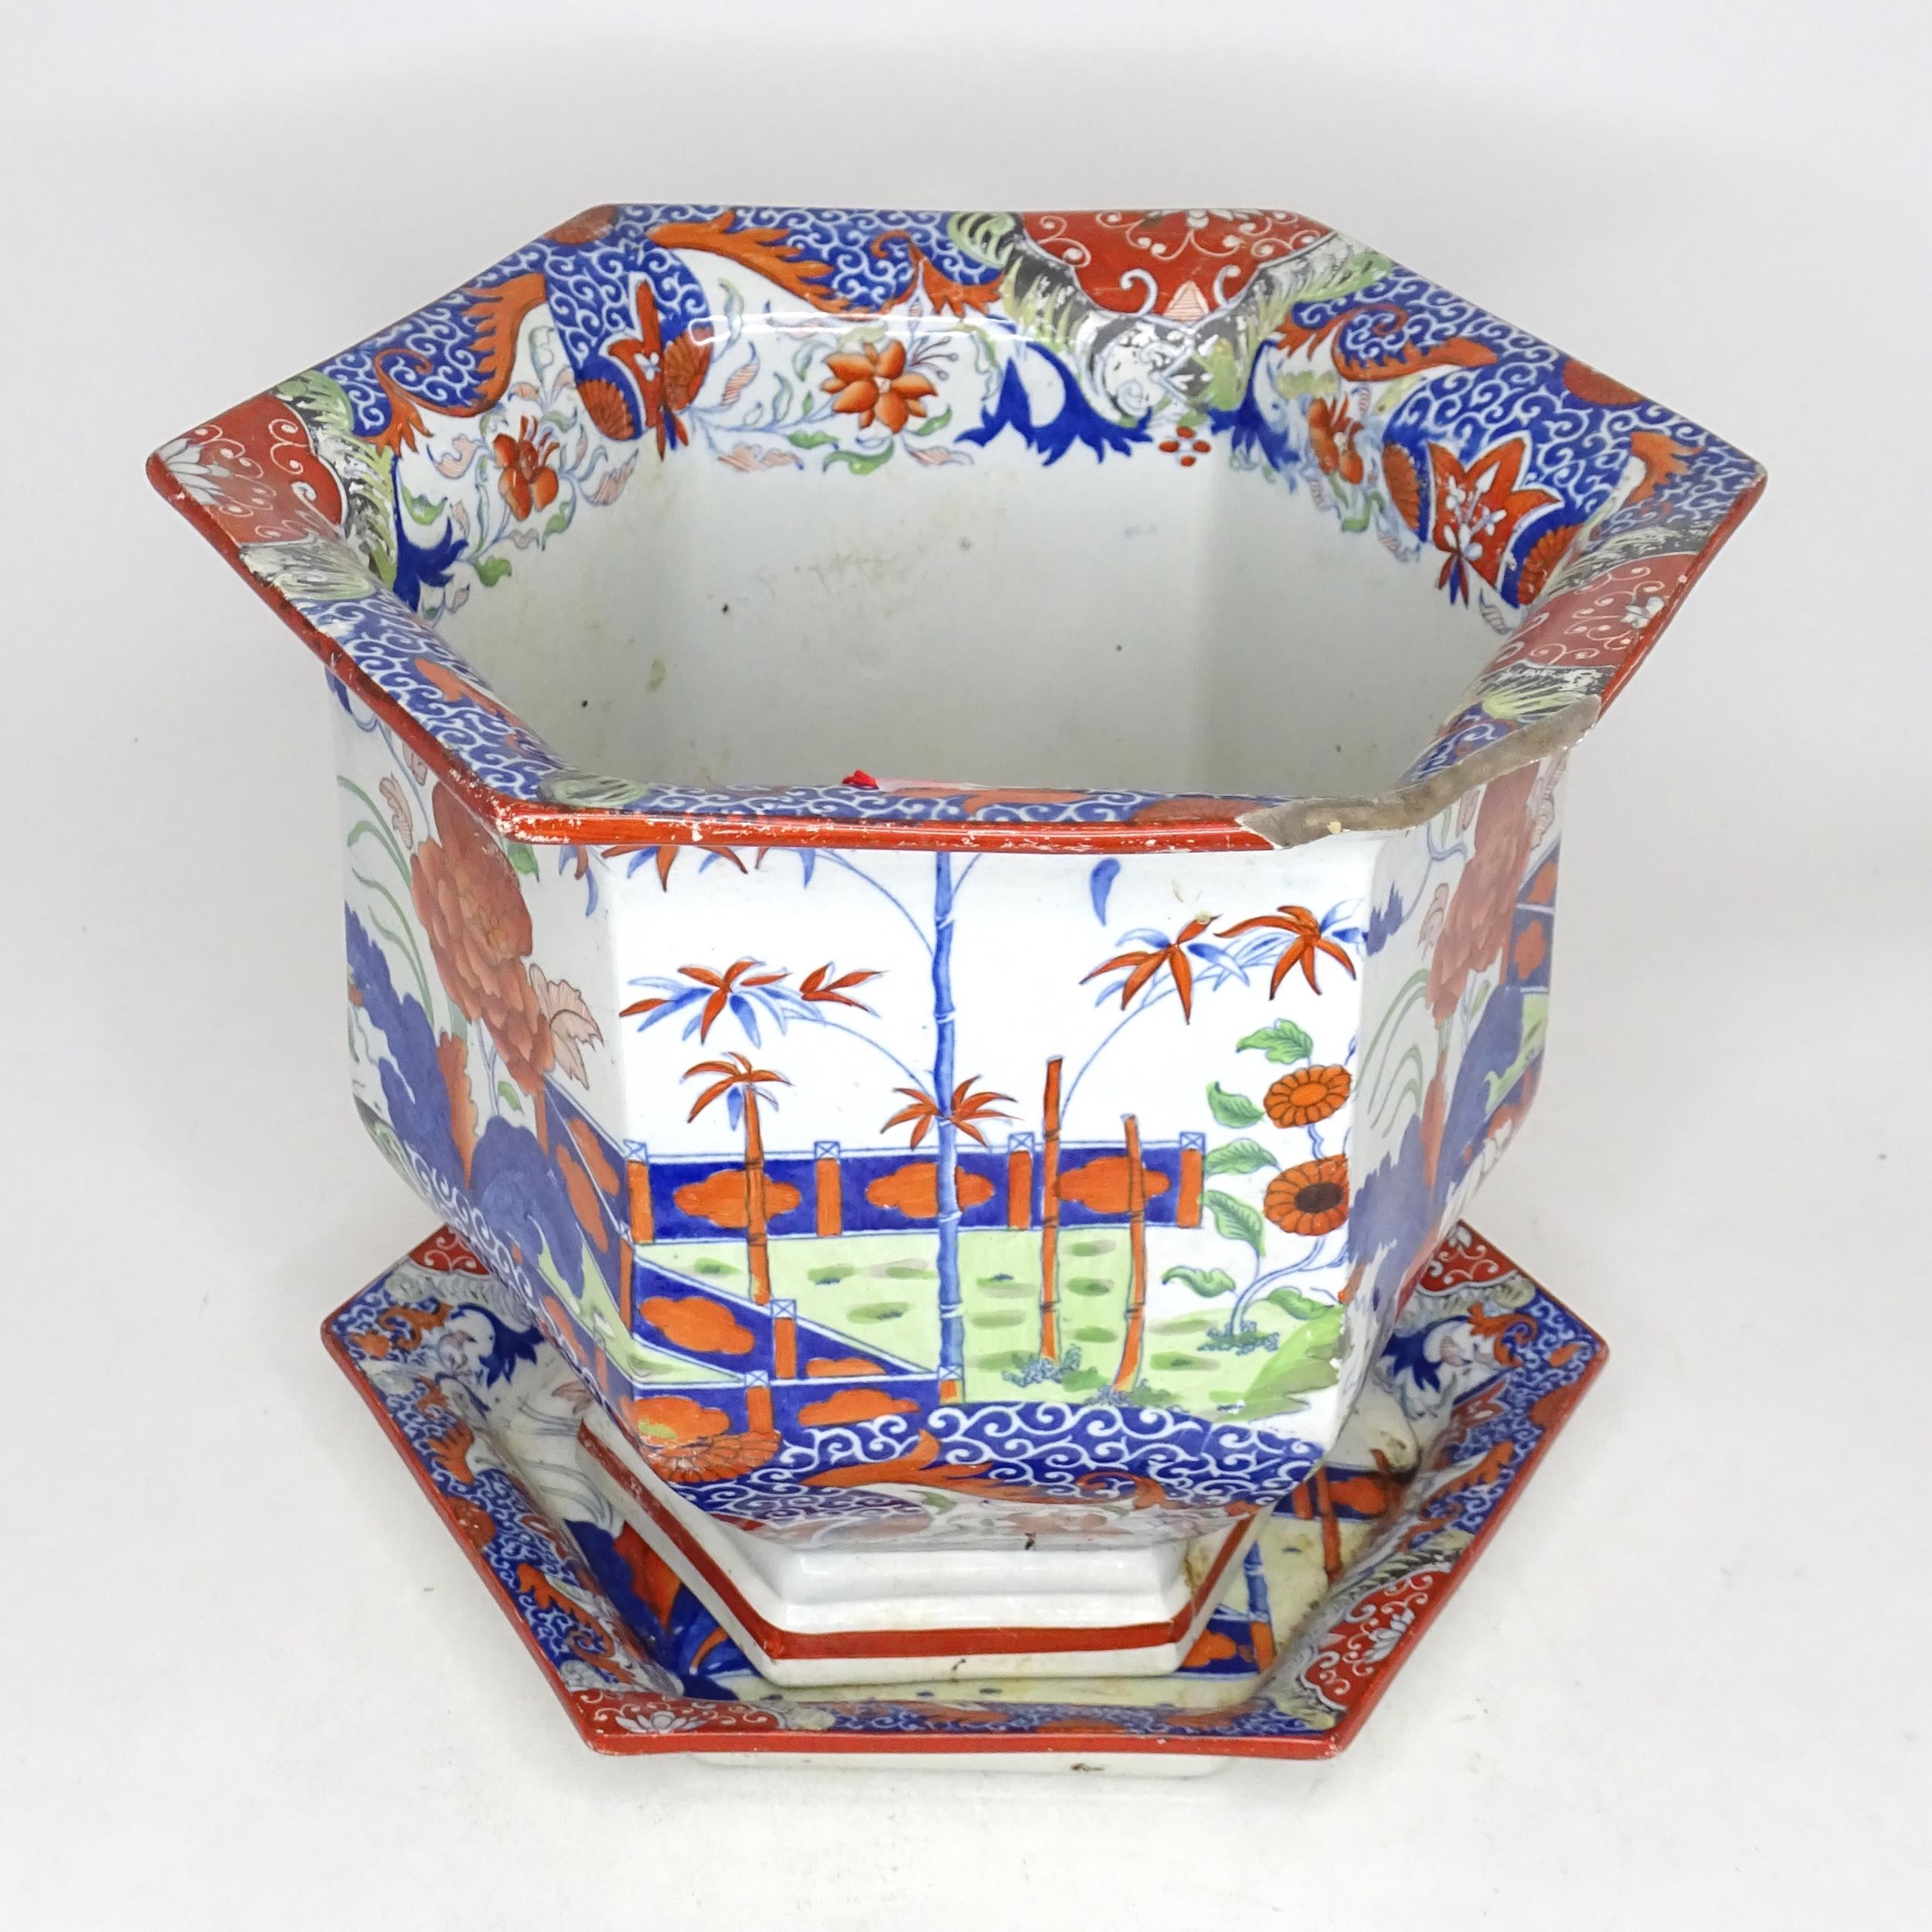 A hexagonal jardiniere / planter and stand with Chinese style decoration with flowers and foliage. - Image 2 of 5